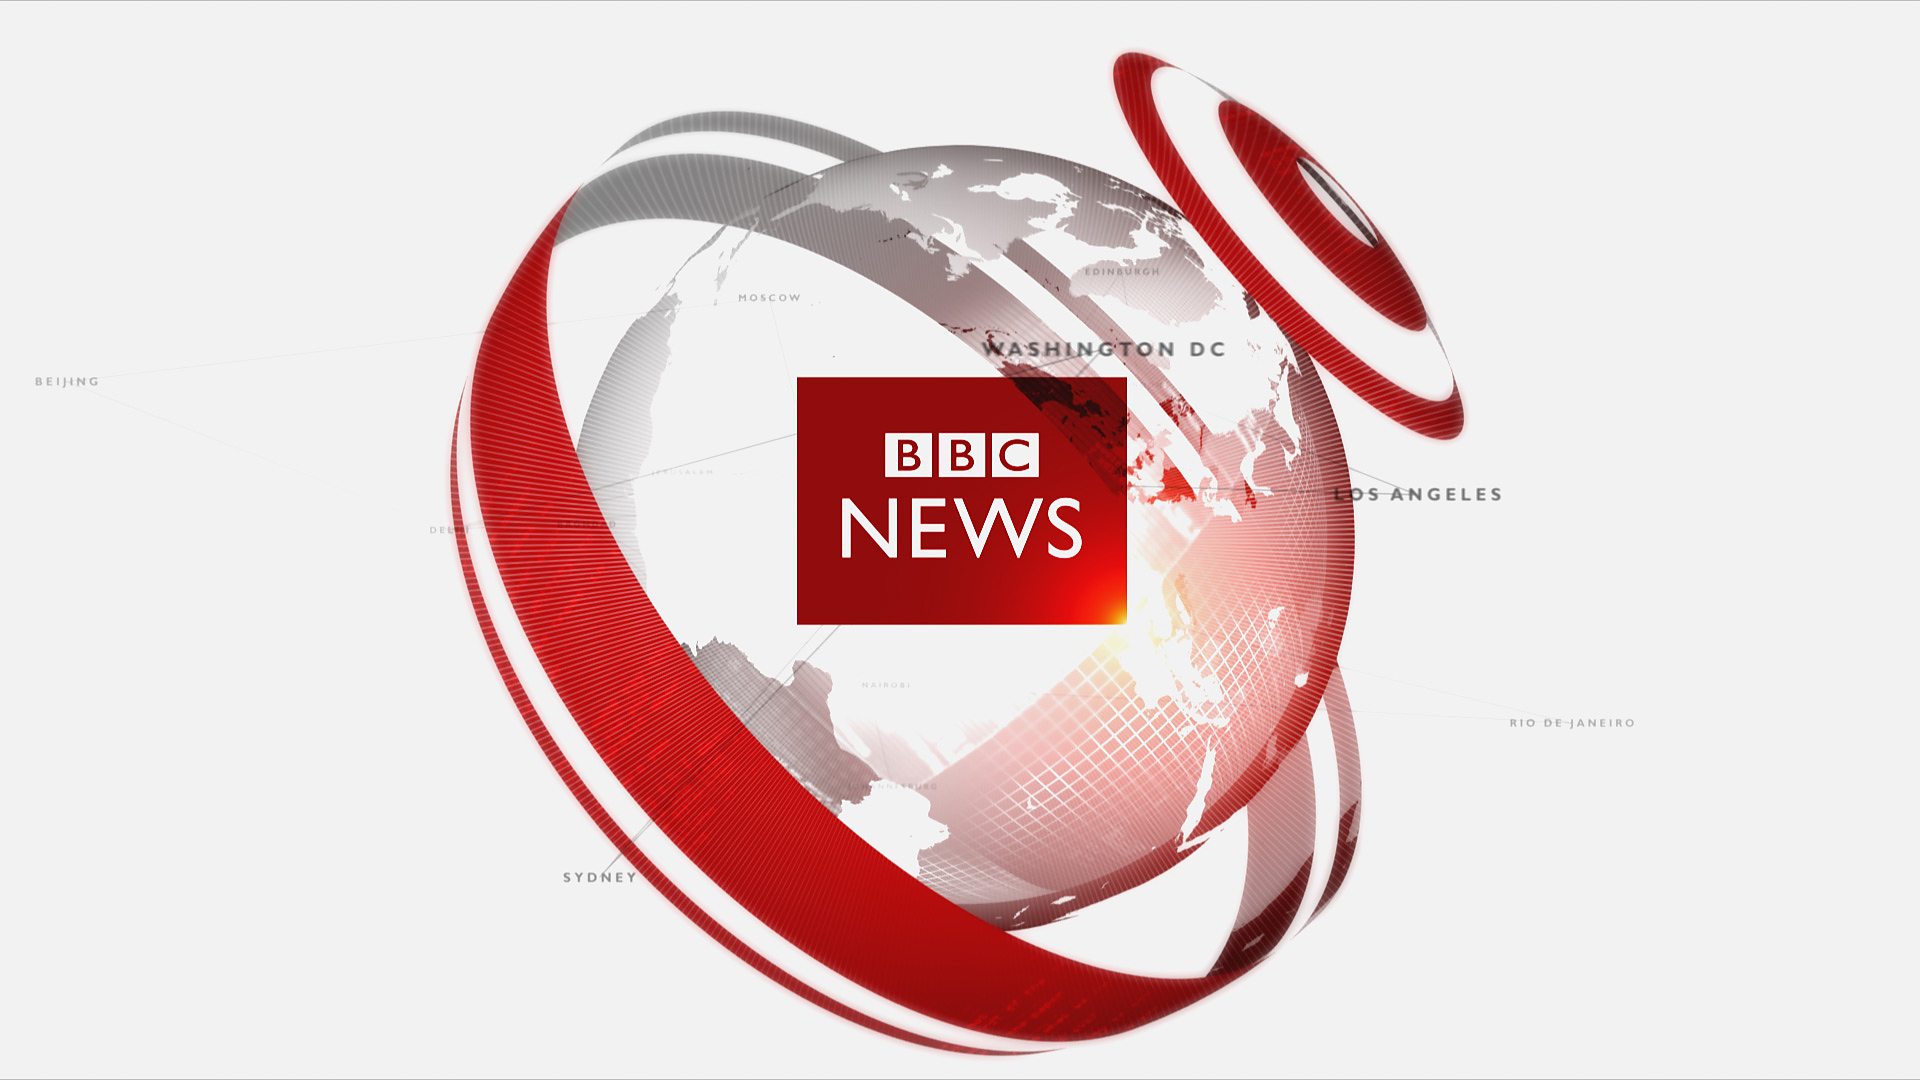 BBC News and Support